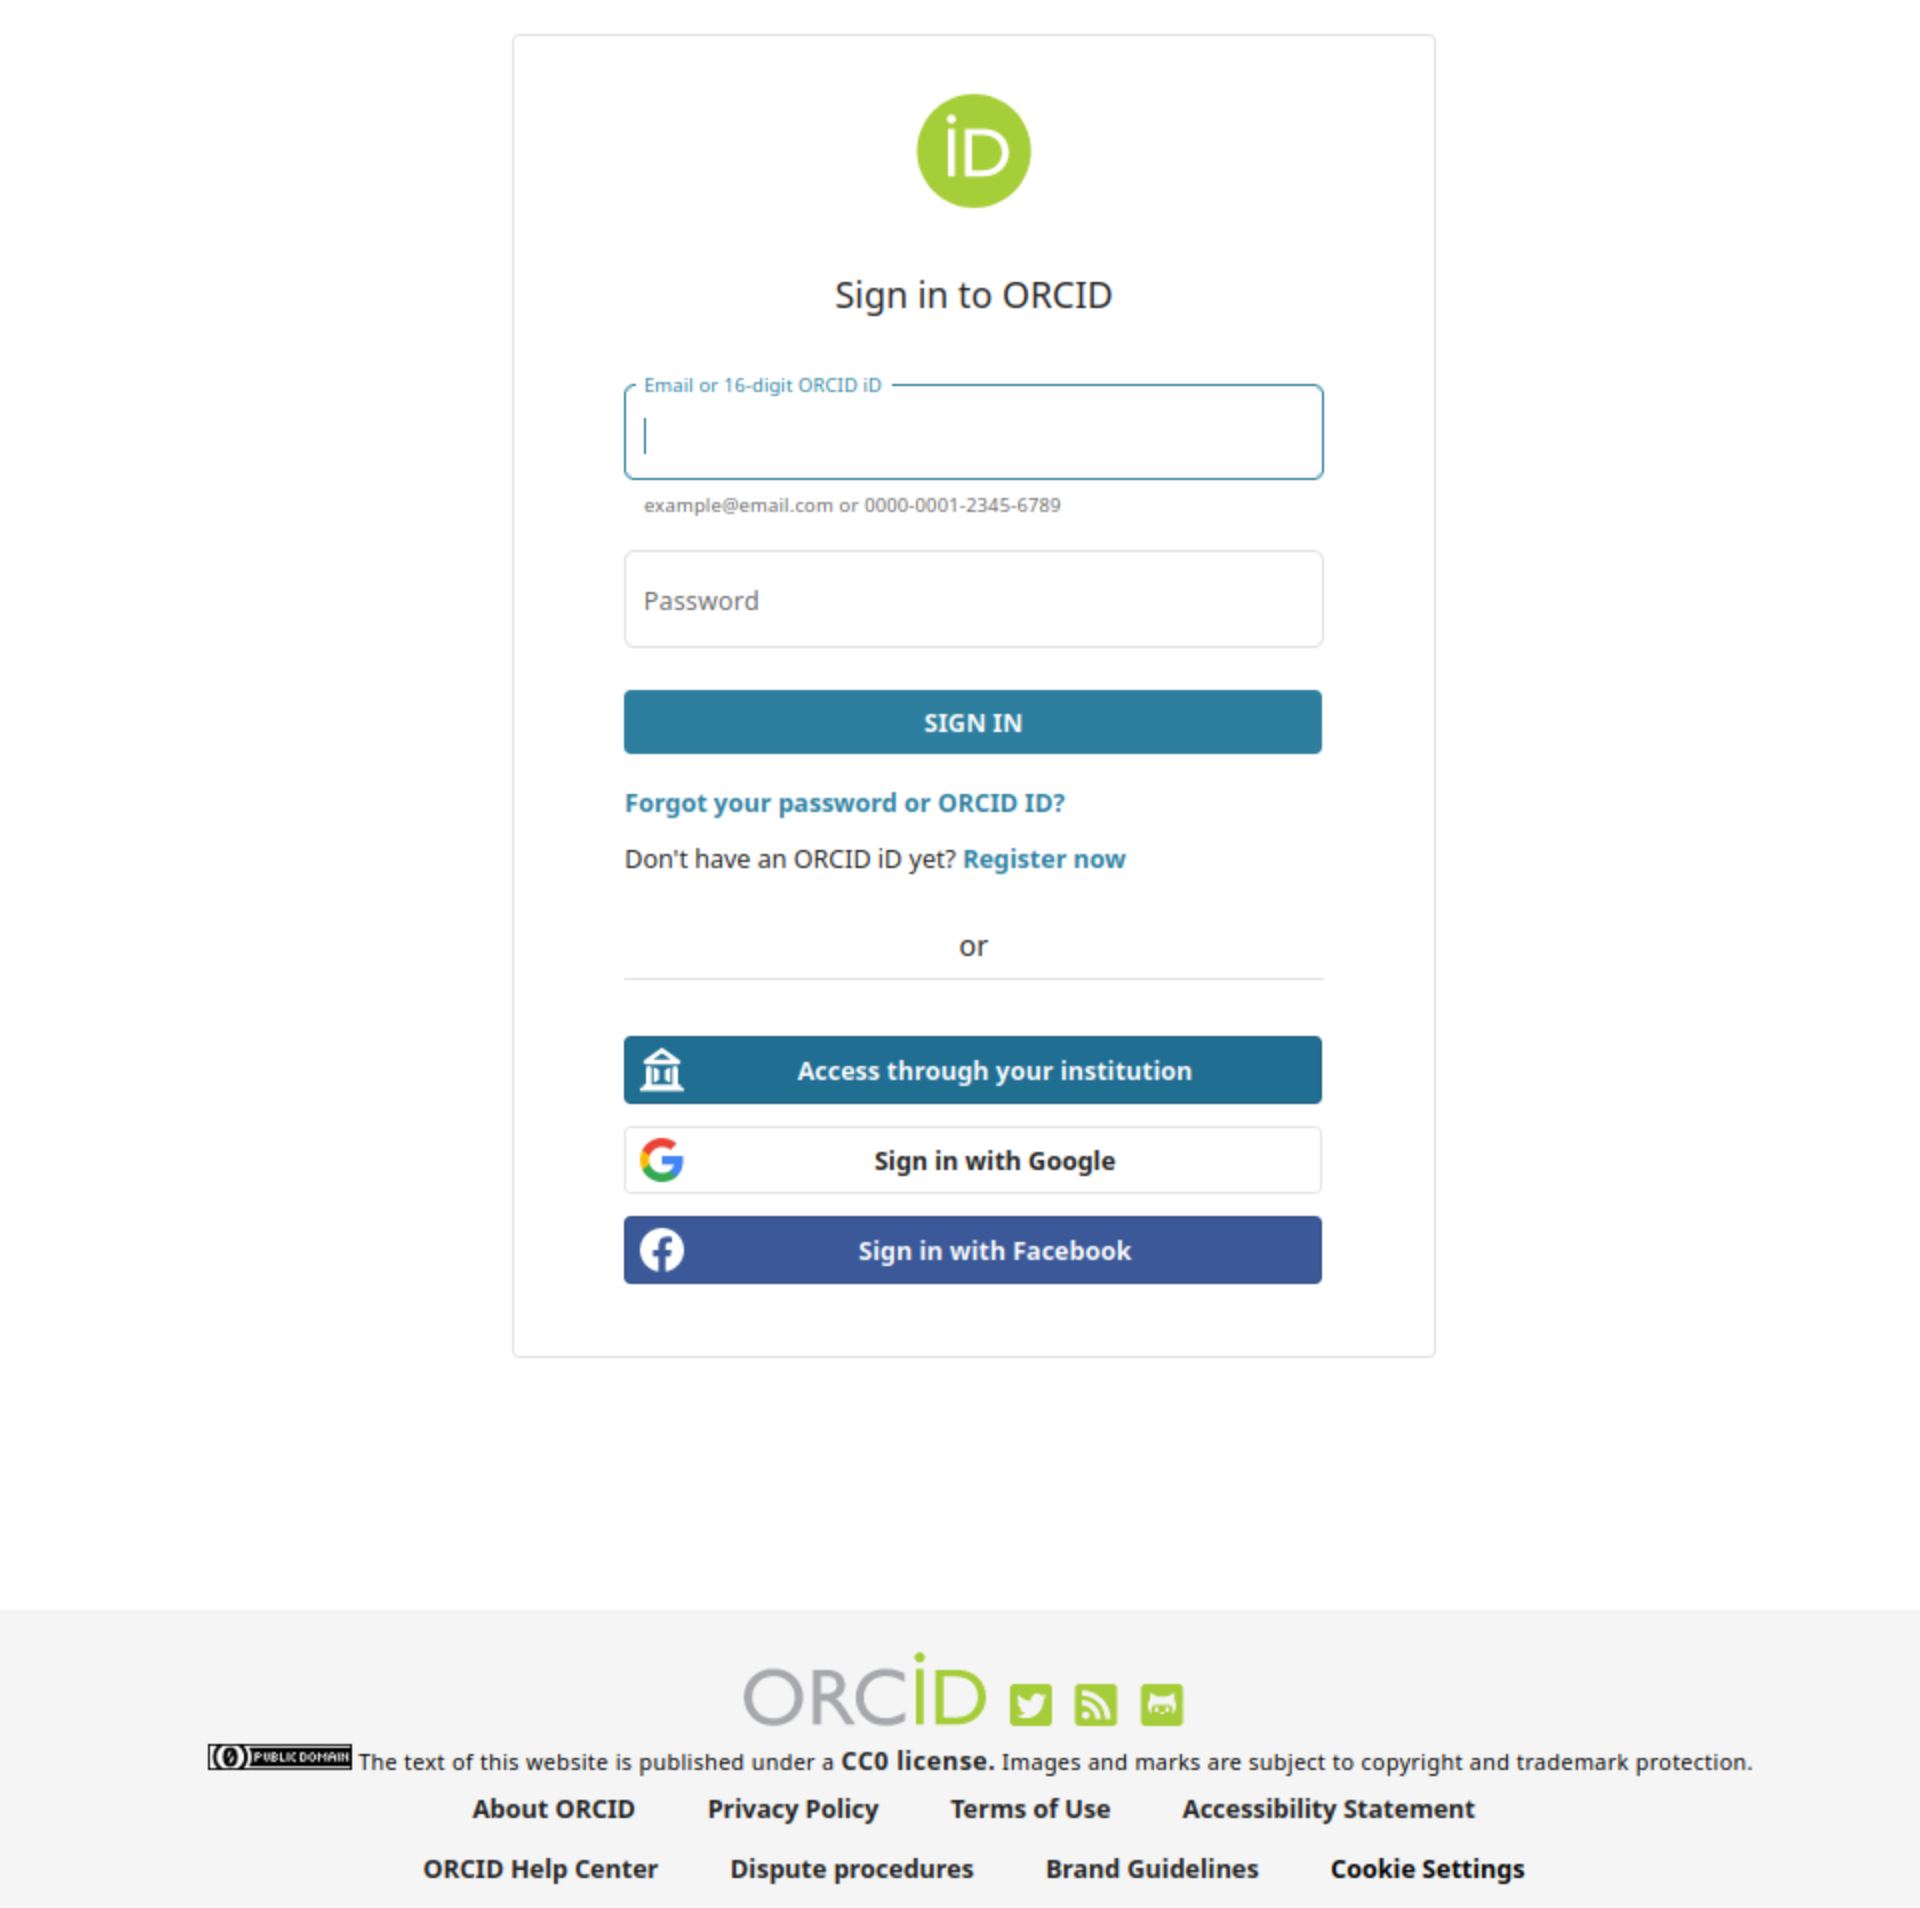 ORCID sign-in form